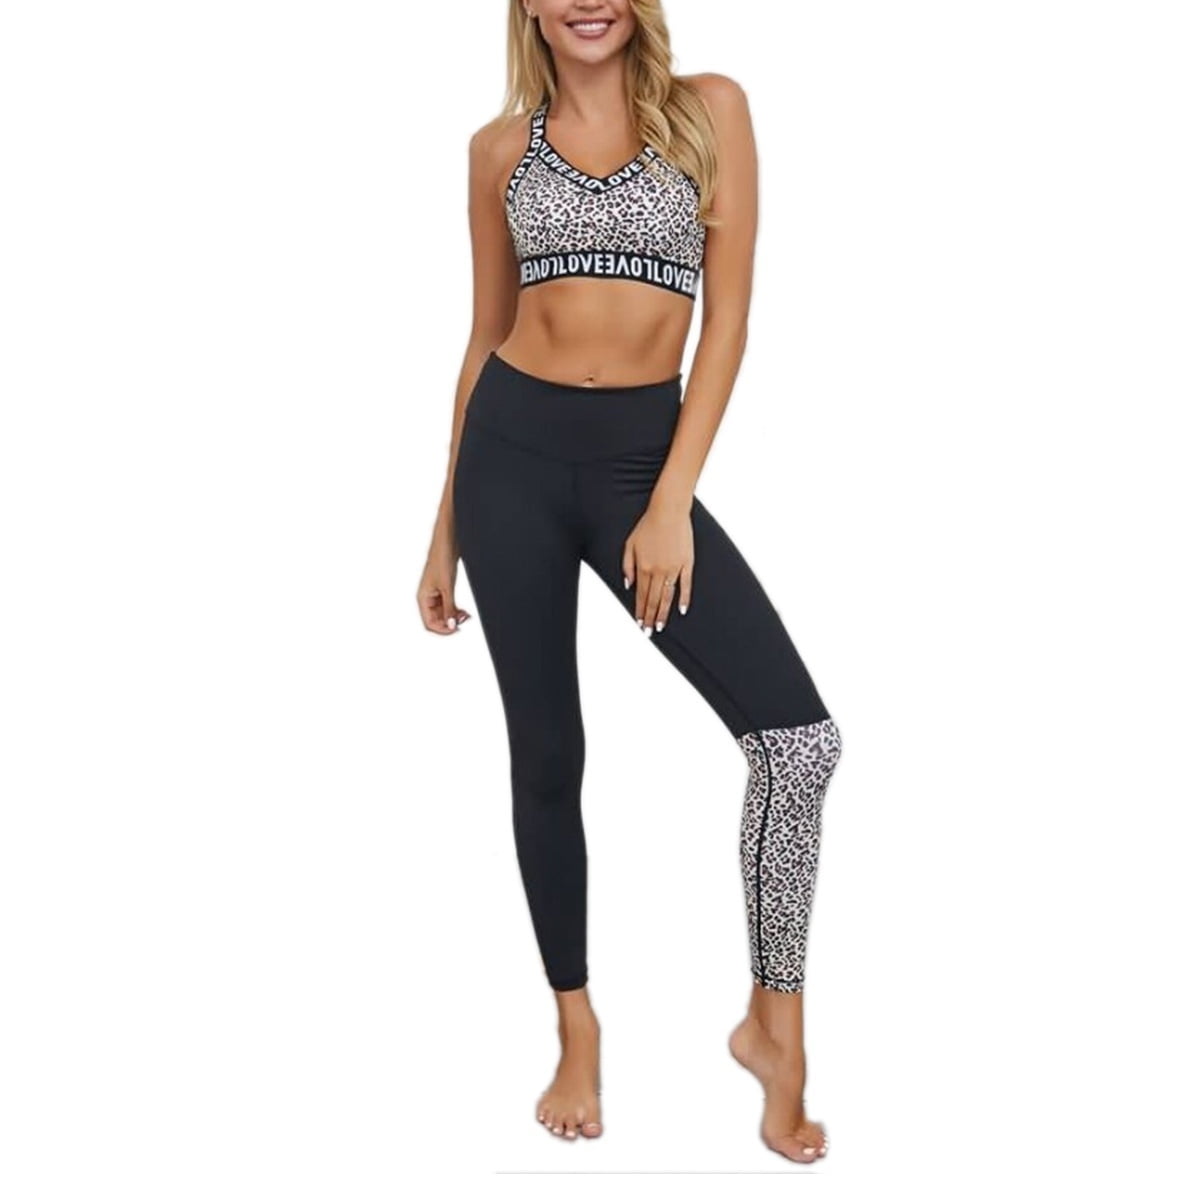 Fitness Sports BraTops and High Waist Leggings Pants Tracksuit Sets S, Coffee Running Bra and Activewear Pants Yoga Clothing Sets Womens Sport Yoga 2 Piece Set 